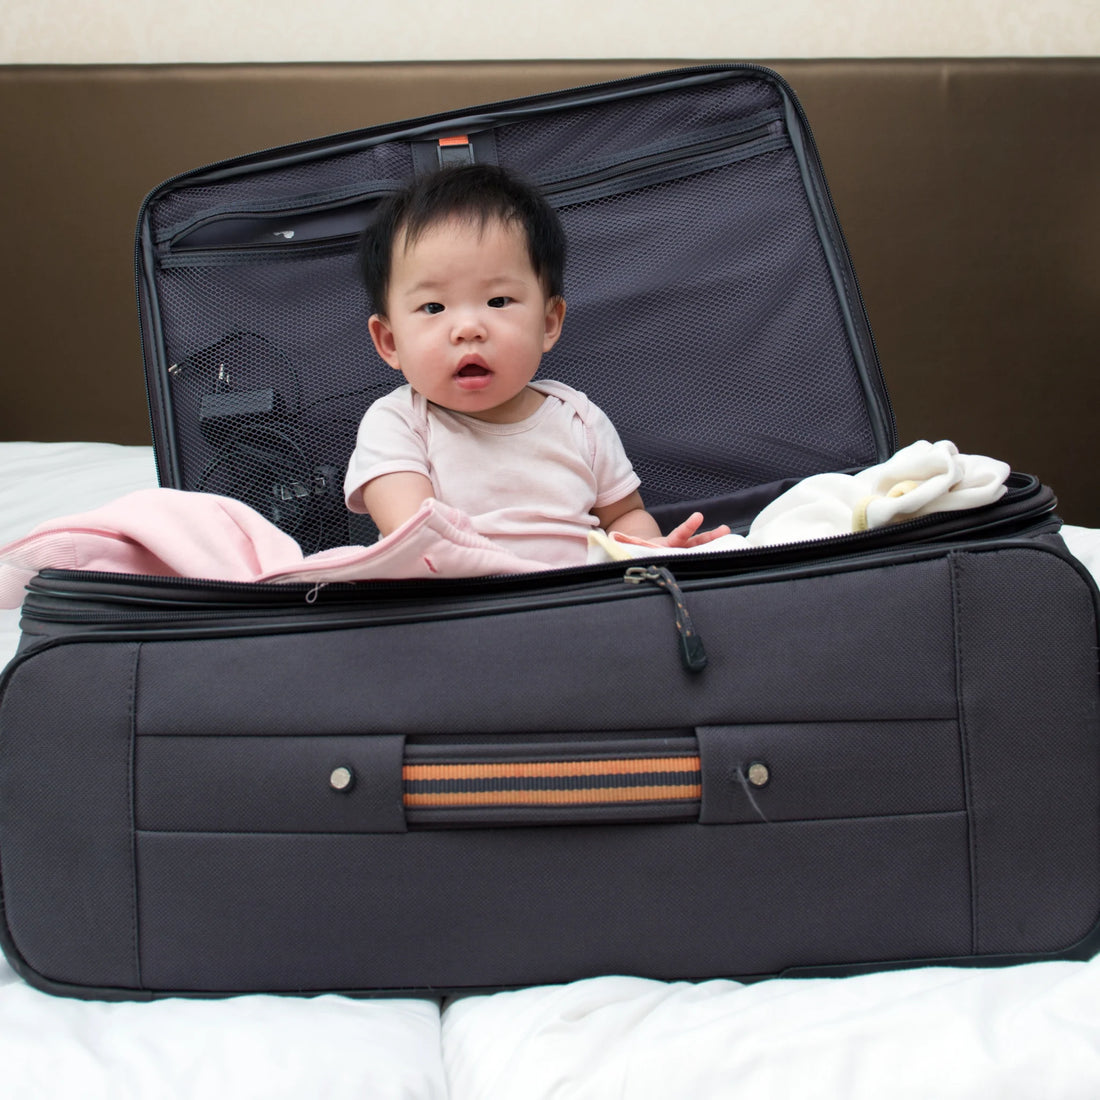 How to travel pack or store a week's worth of breast milk or baby formula